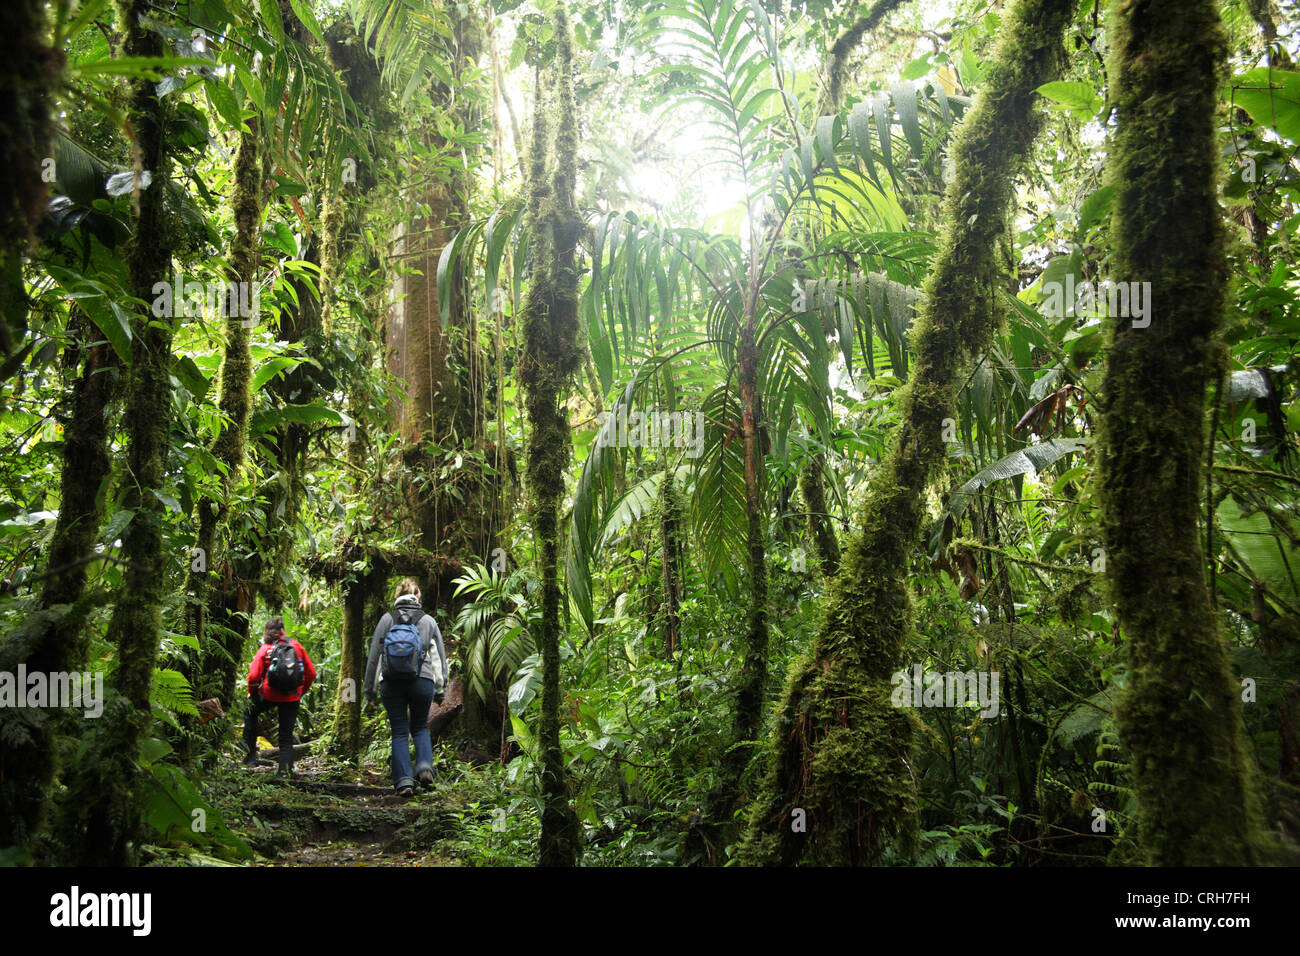 Hikers in Monteverde Cloud Forest Preserve, Costa Rica. January 2012. Stock Photo